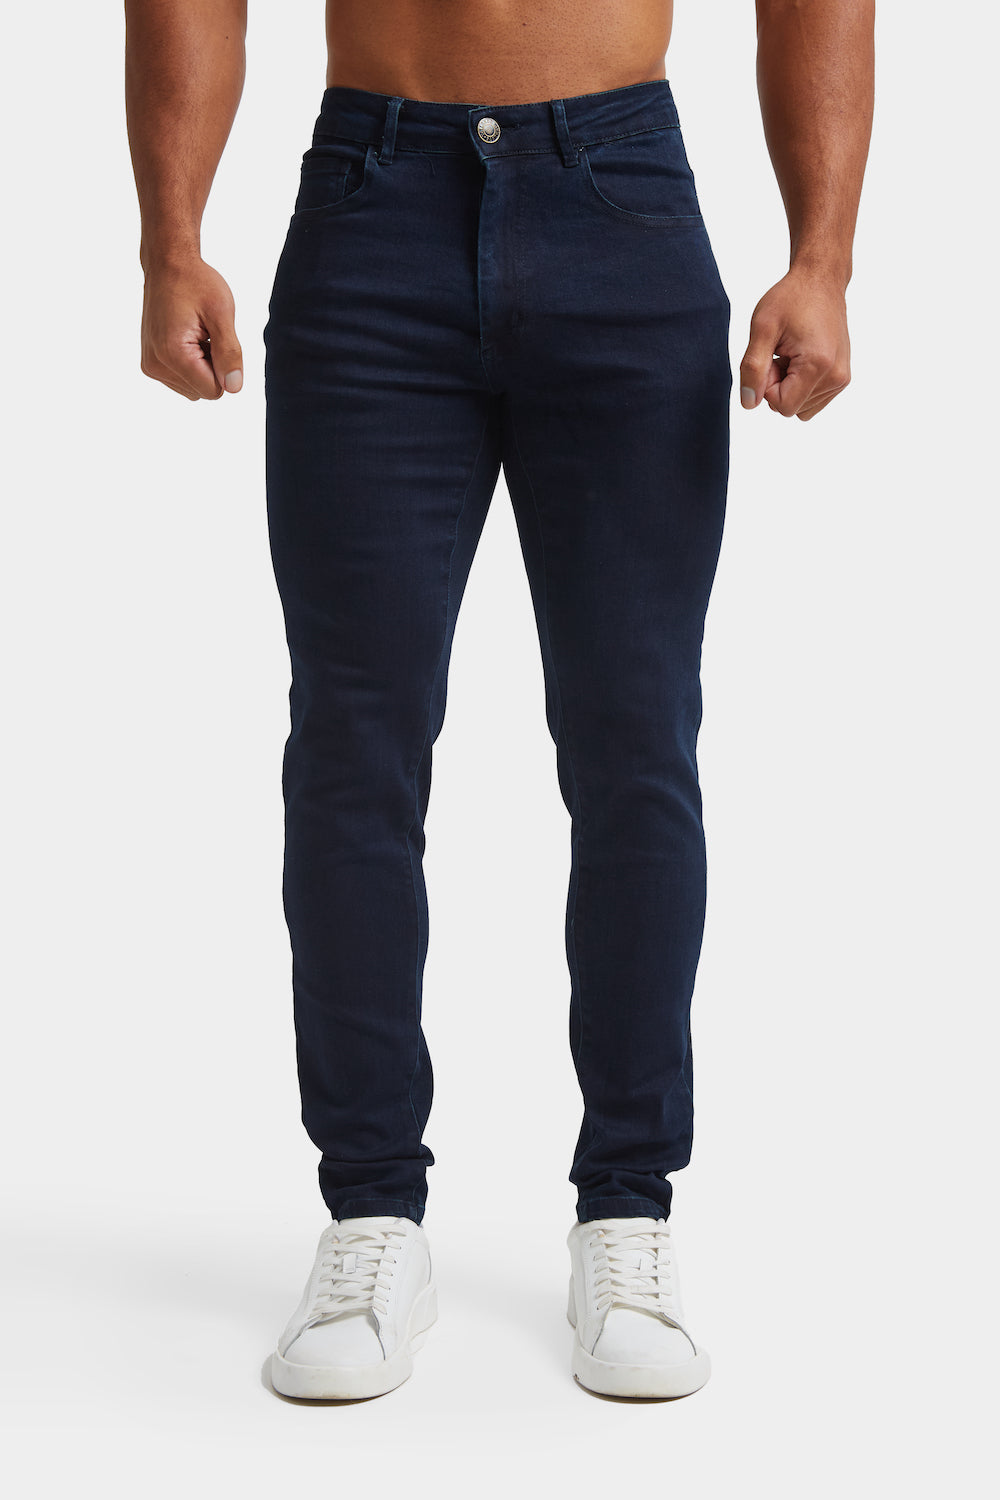 Blue wide leg tailored jeans | River Island